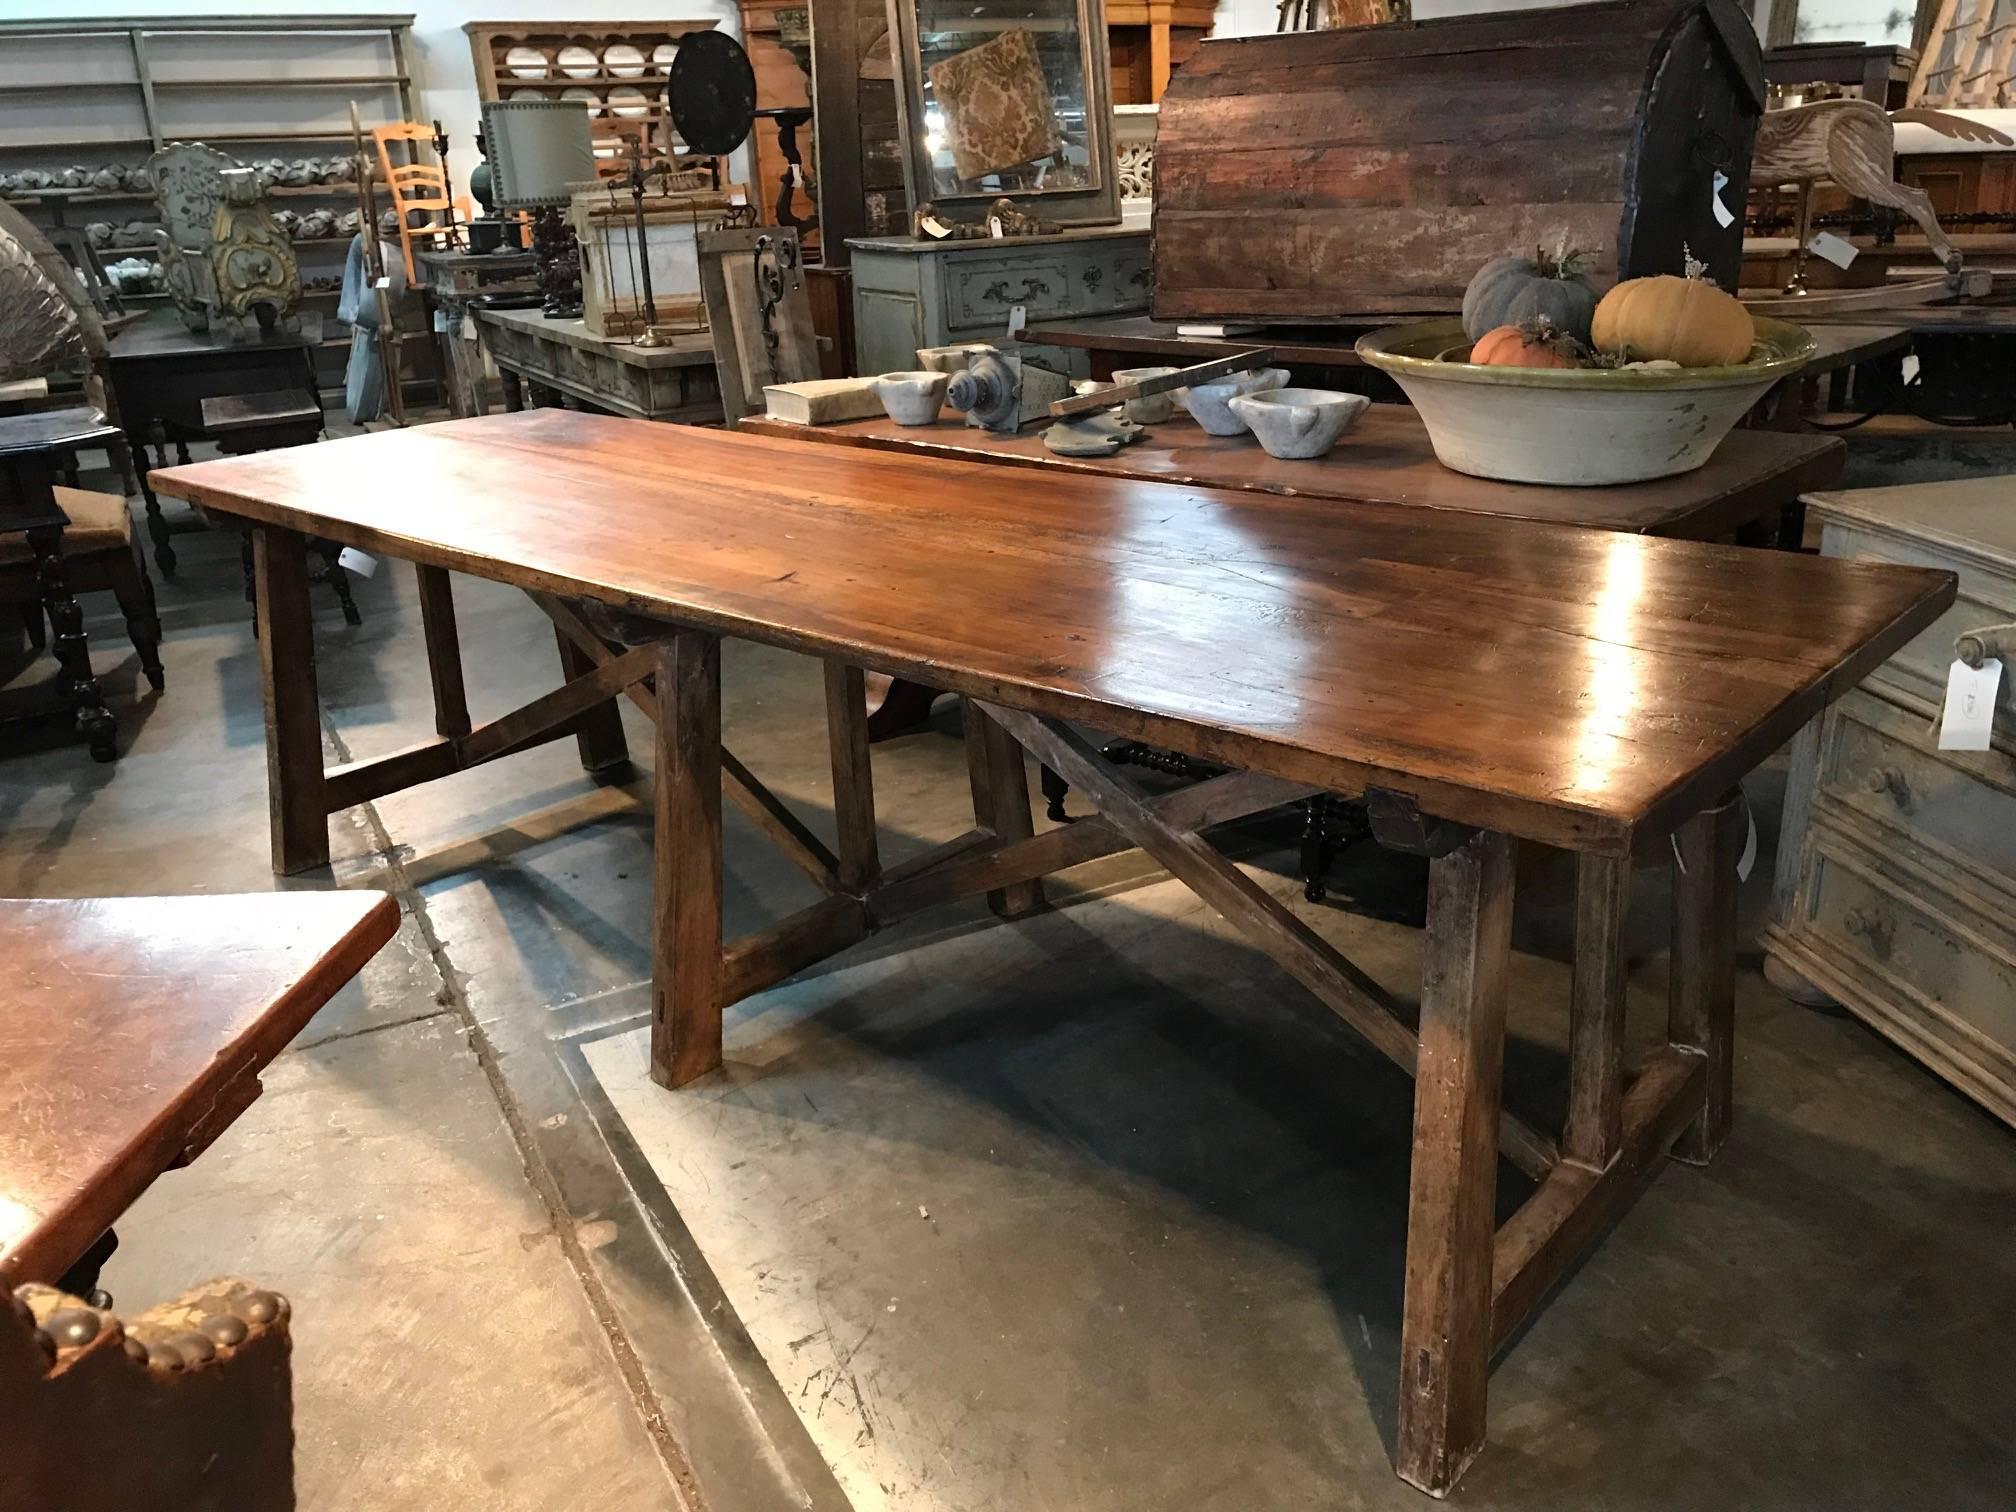 A sensational mid-18th century farm table from the Catalan region of Spain. Wonderfully and soundly constructed from walnut with an outstanding solid board top. The table's clean and minimalist lines lend this piece a very contemporary feel.